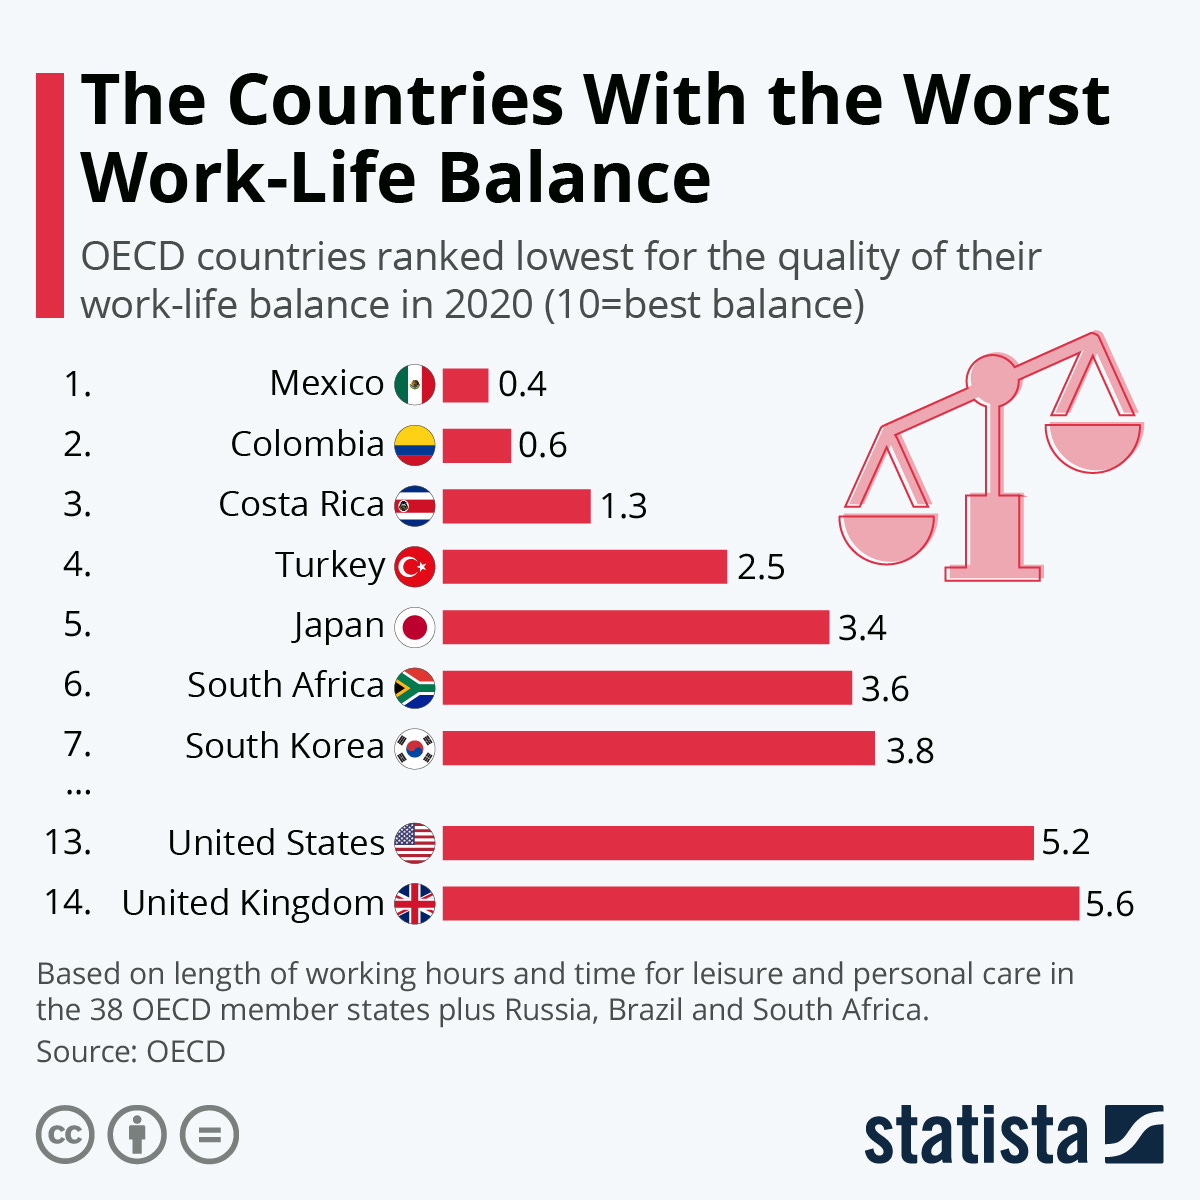 Chart shows the countries with the worst work-life balance